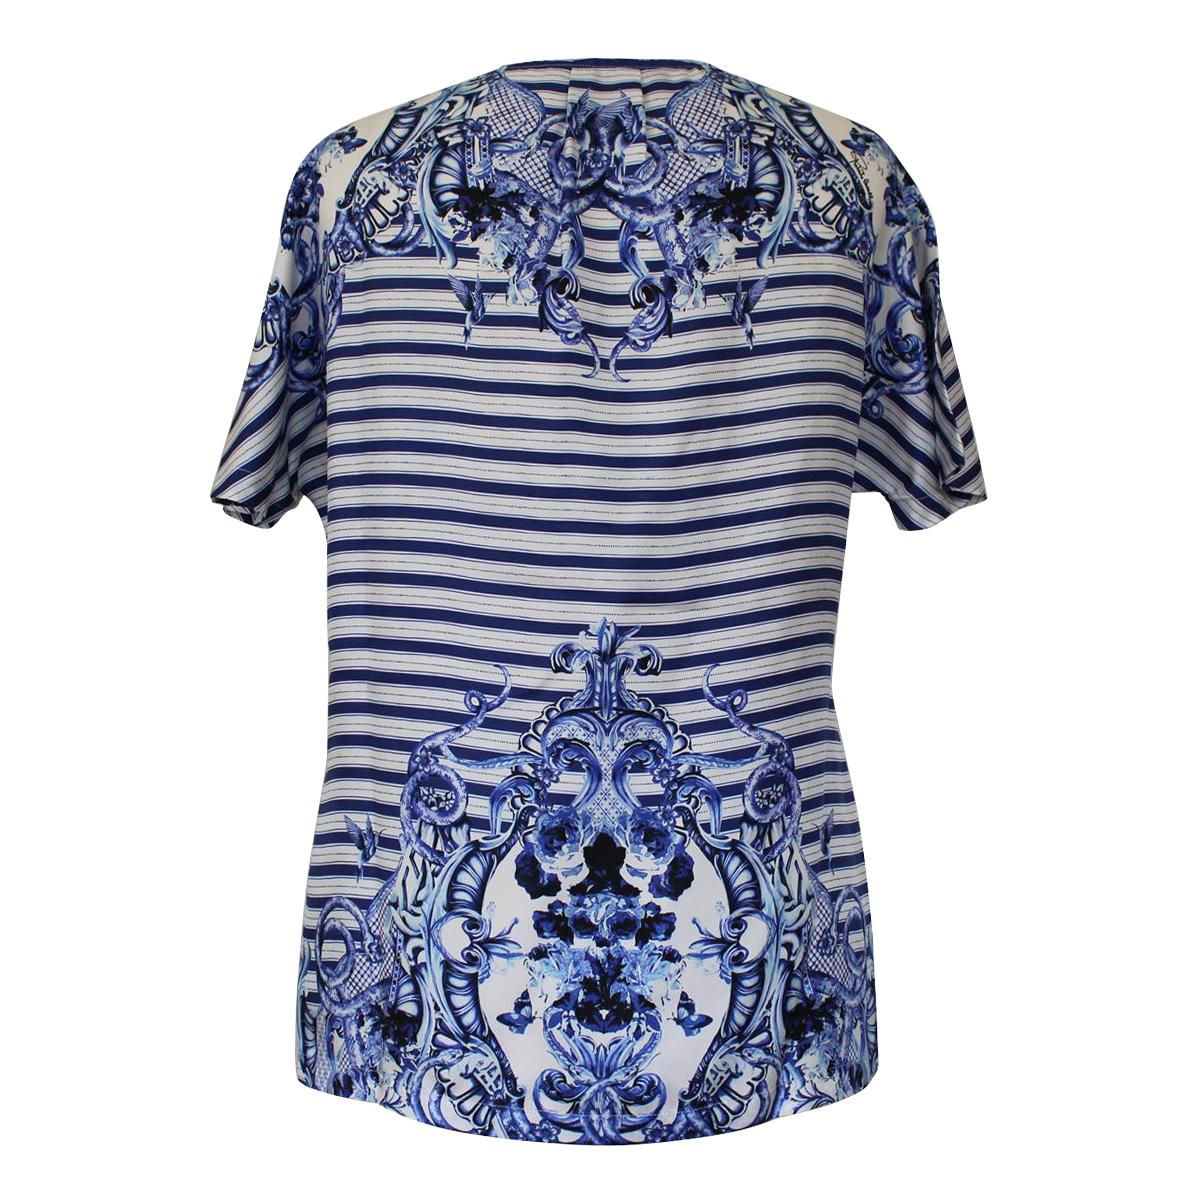 Beautiful Roberto Cavalli blouse
Silk
Fancy print
White and blue
Short sleeve
Total length cm 60 (23.6 inches)
WORLDWIDE EXPRESS SHIPPING INCLUDED IN THE PRICE !